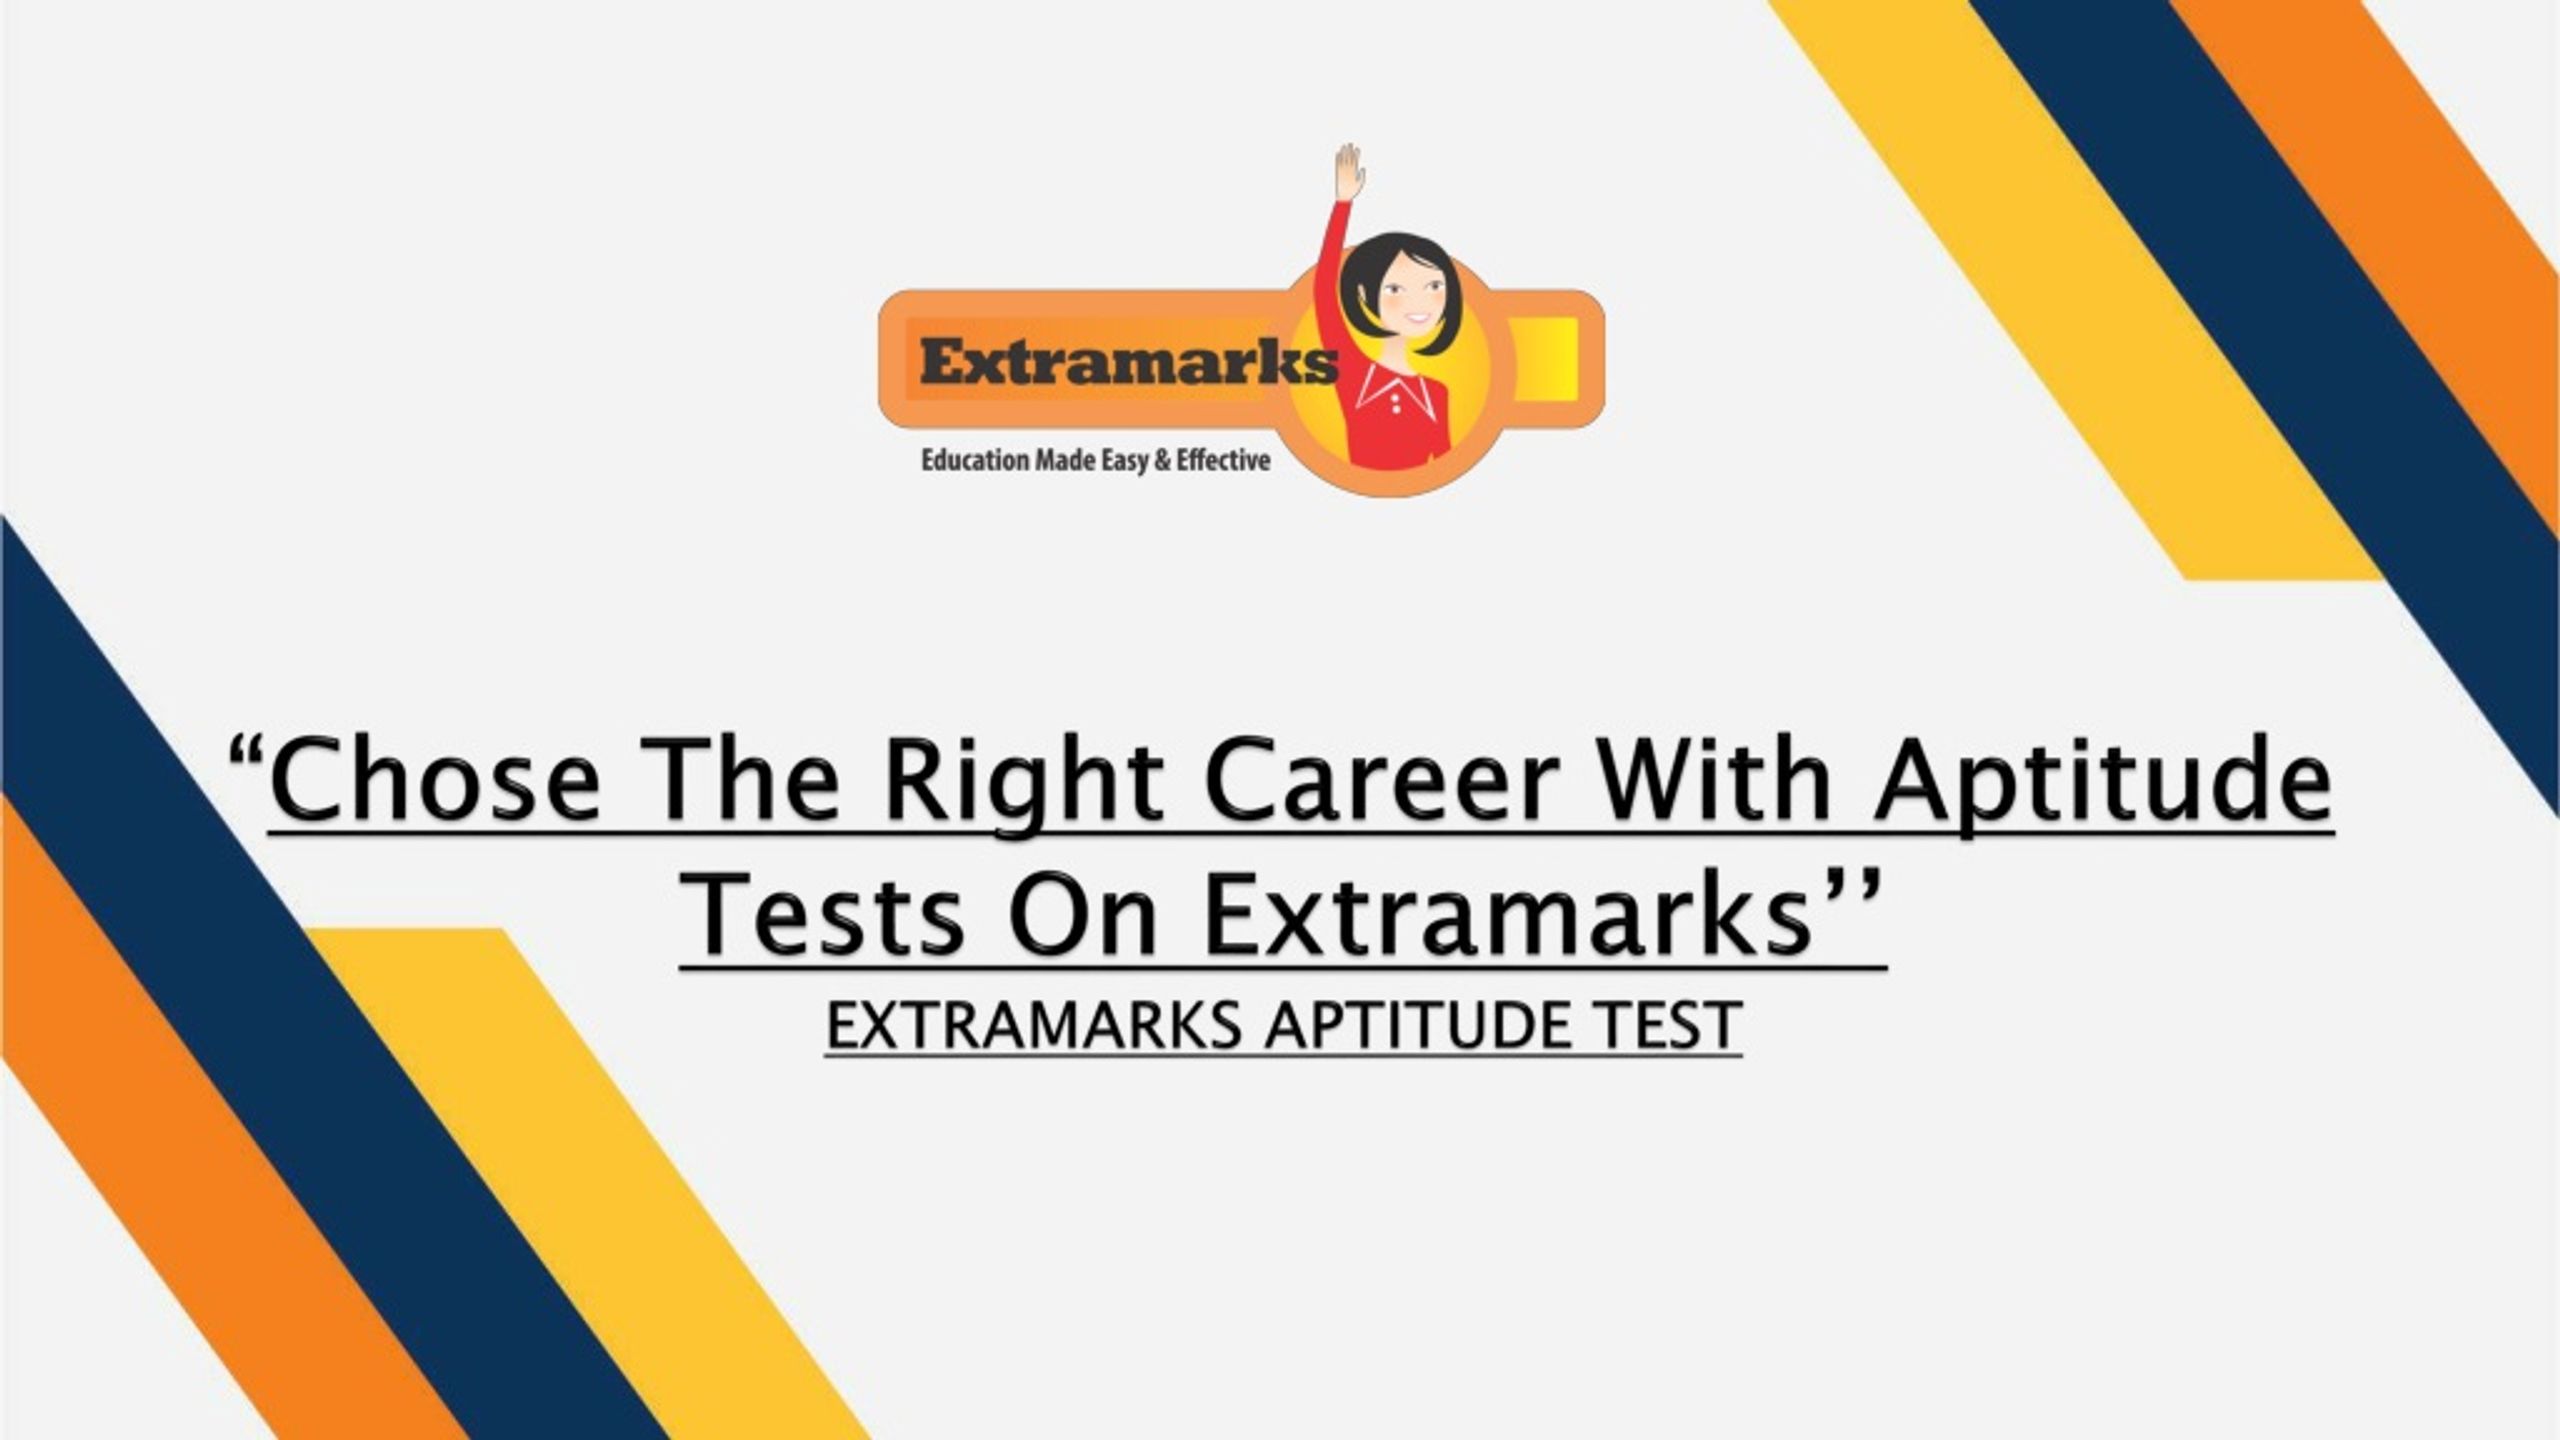 ppt-chose-the-right-career-with-aptitude-tests-on-extramarks-powerpoint-presentation-id-9058208